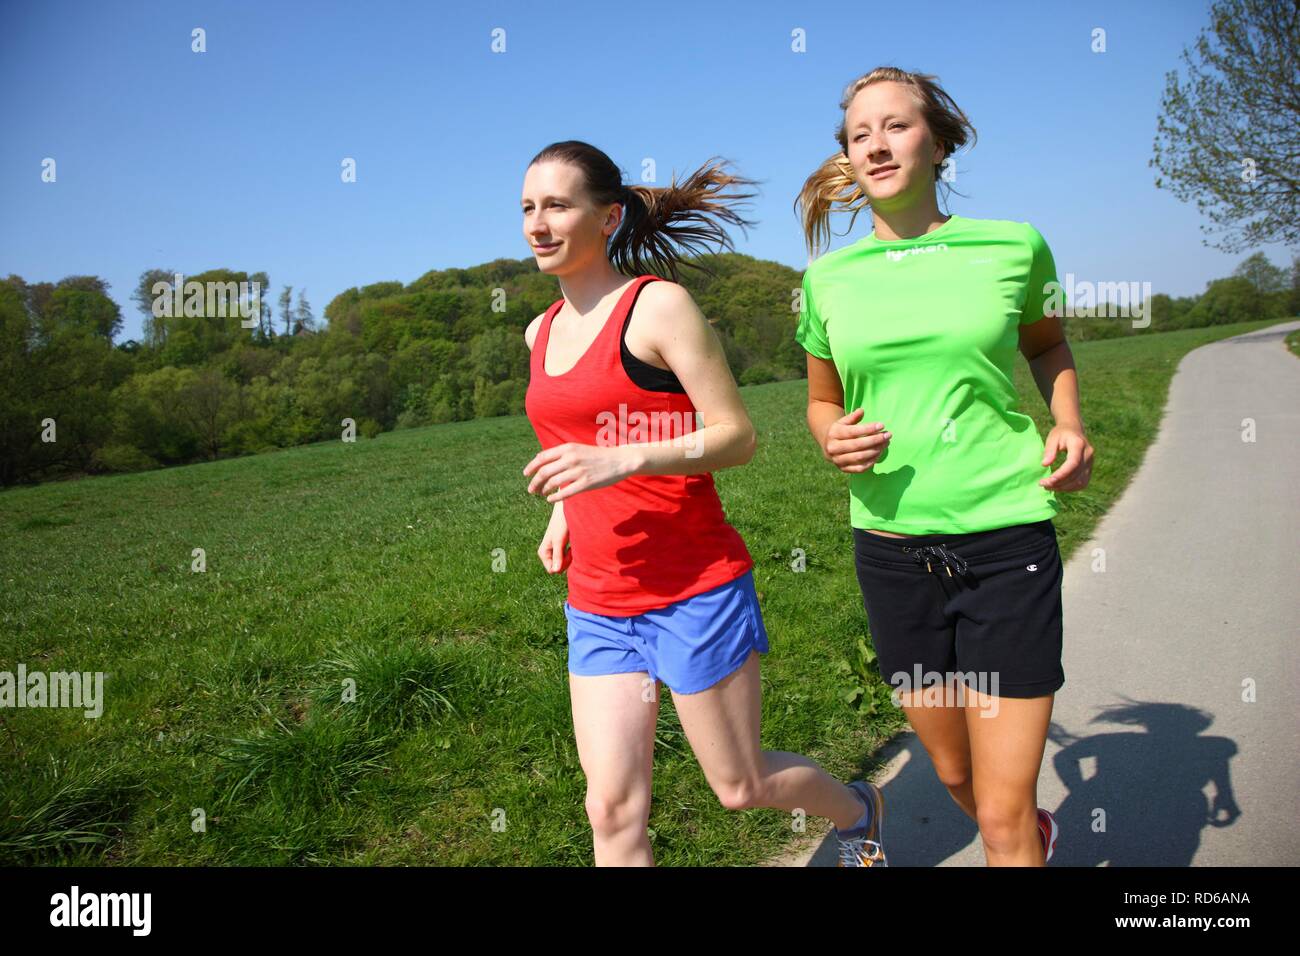 Two recreational runners, young women, 25-30 years, jogging Stock Photo